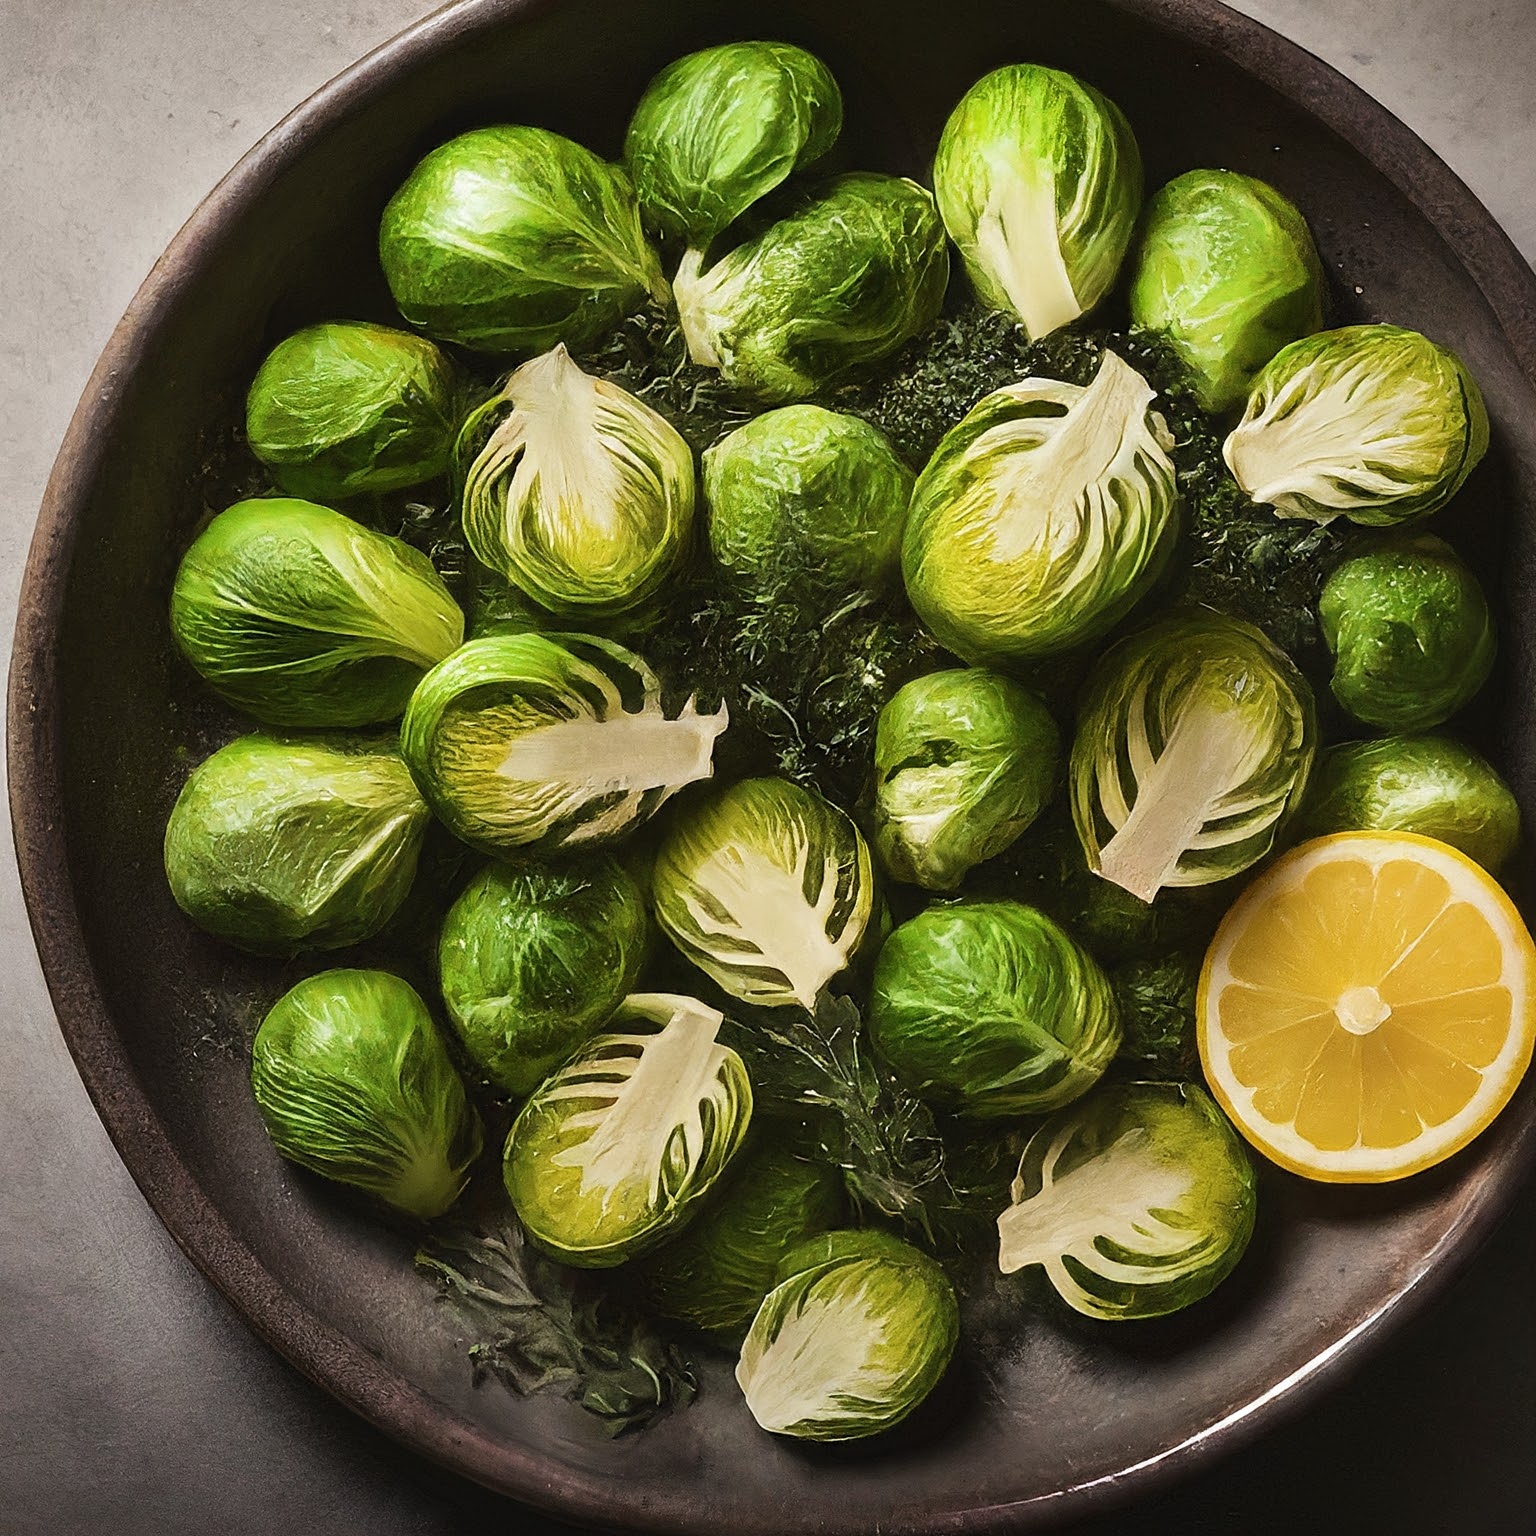 roasted brussel sprouts recipe: Powerful flavor!